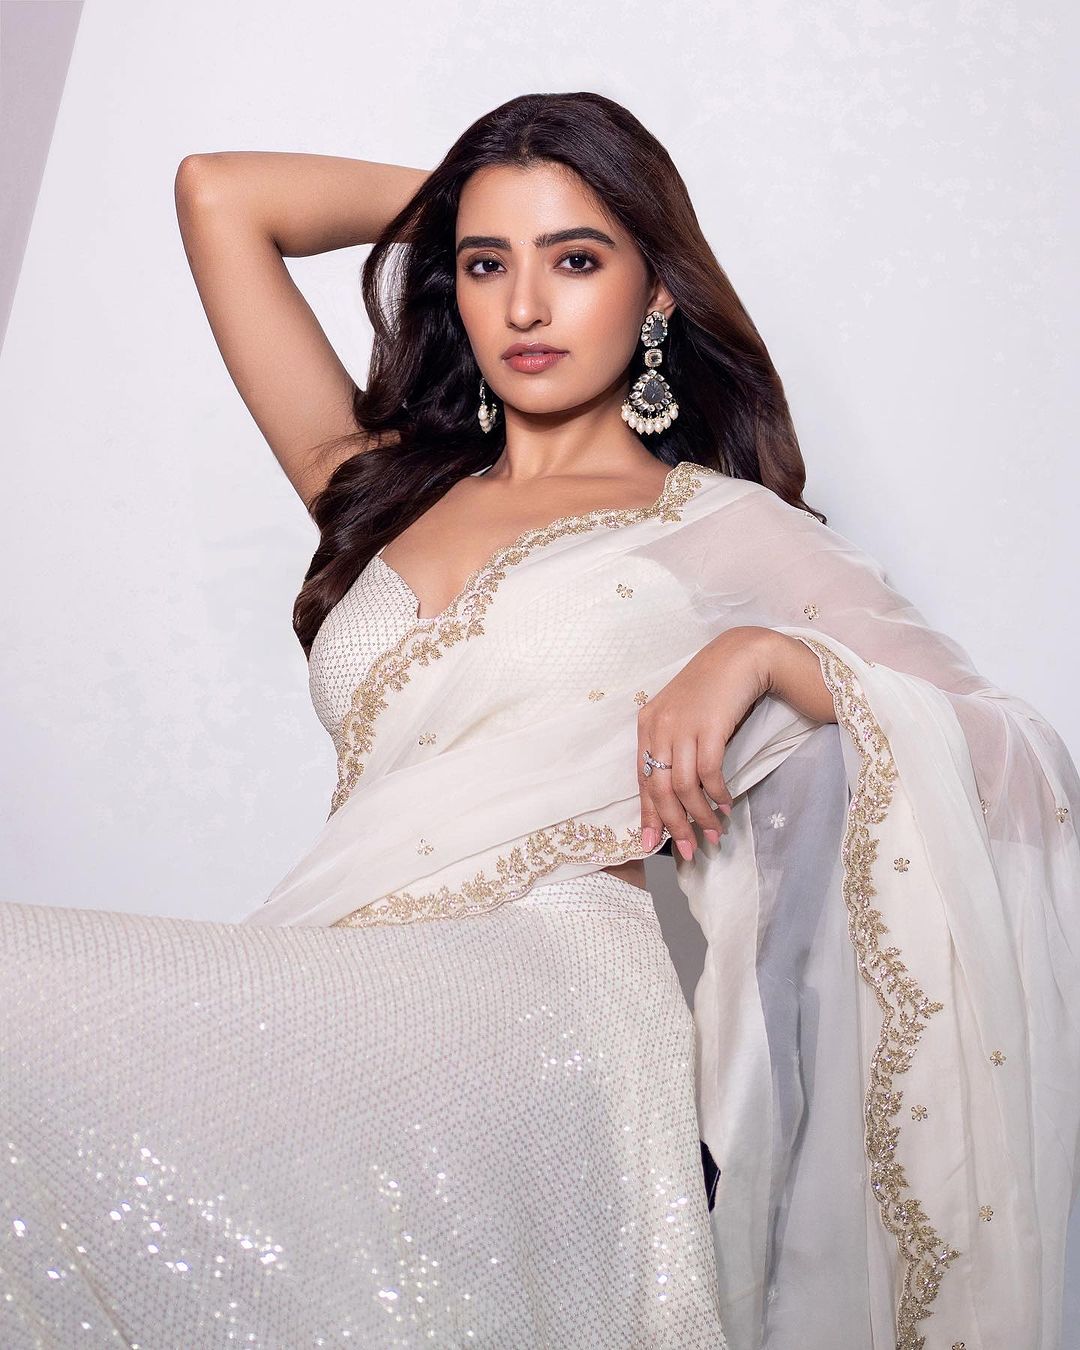 Actress rukshaar dhillon is mesmerizing with her beauty-Actressrukshaar Photos,Spicy Hot Pics,Images,High Resolution WallPapers Download